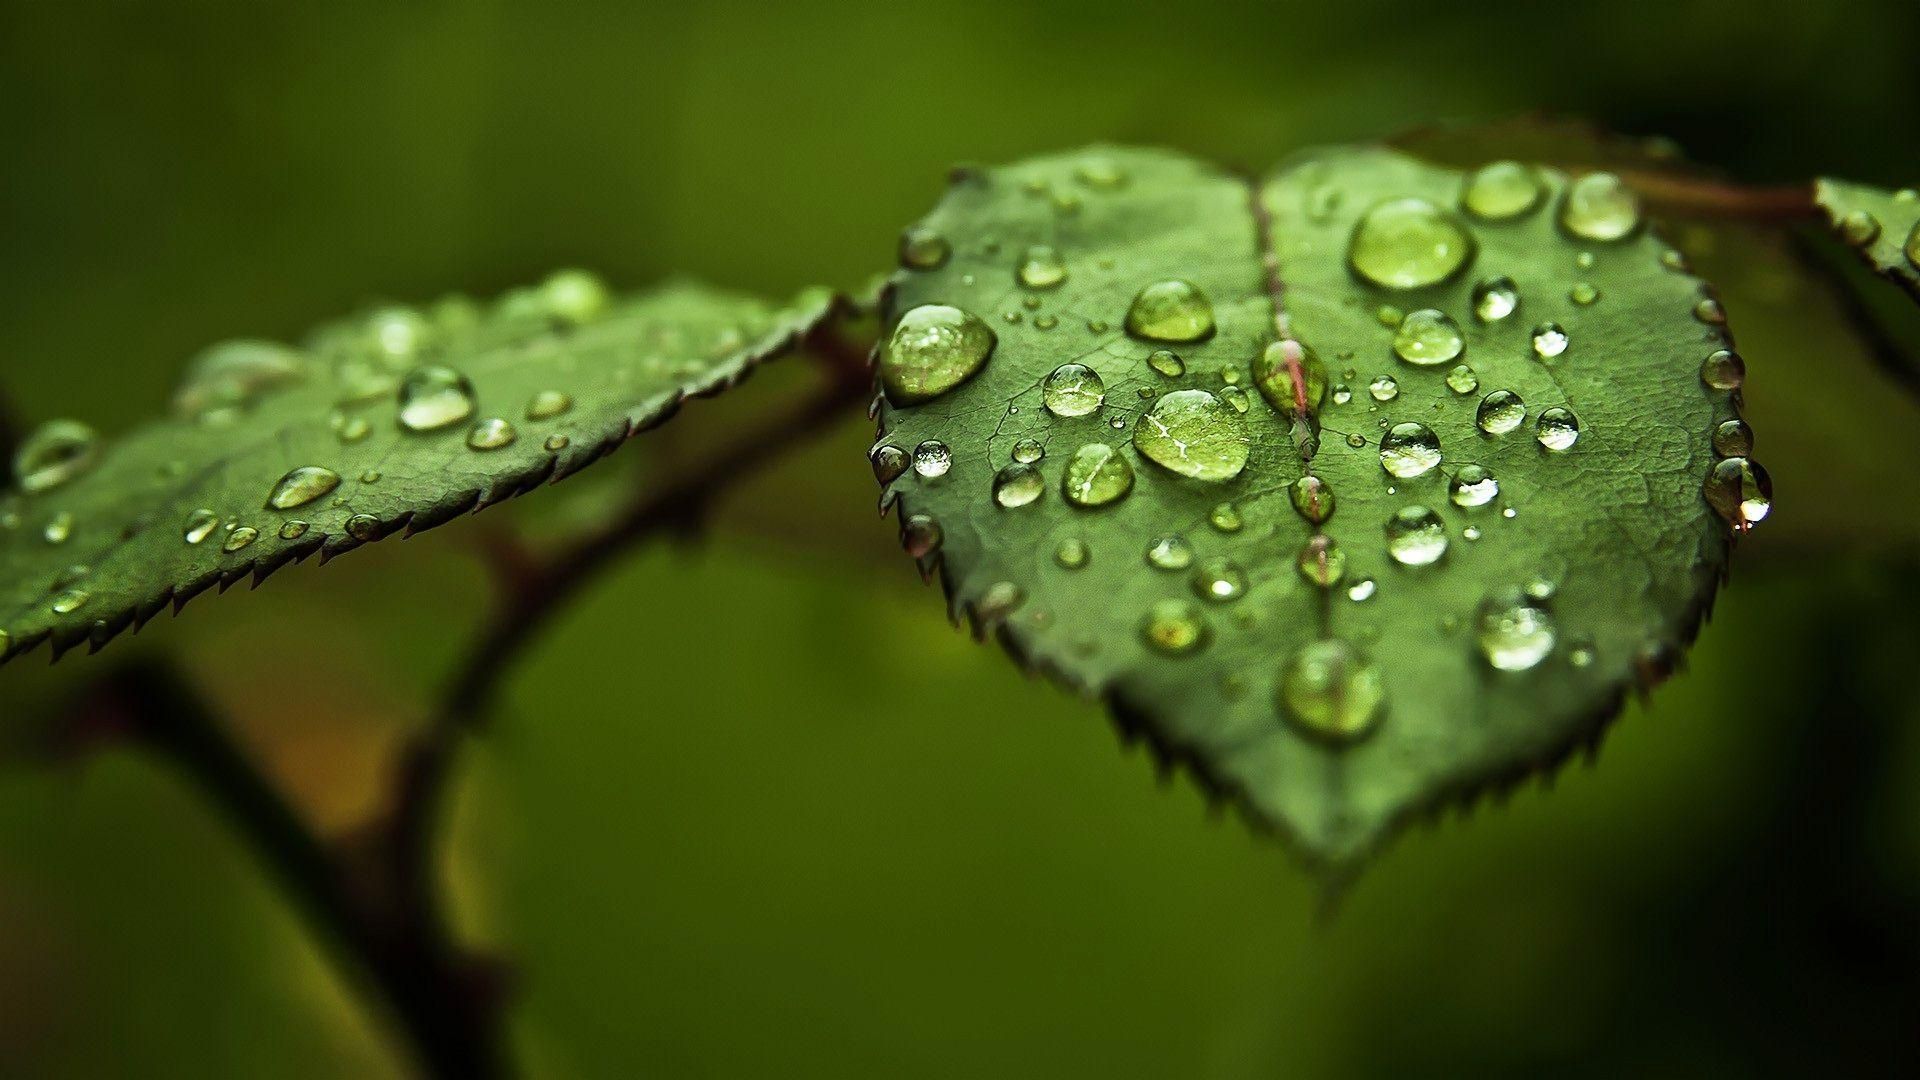 Green - leaf - dew -nature - macro - photography | Green 3 painting ...